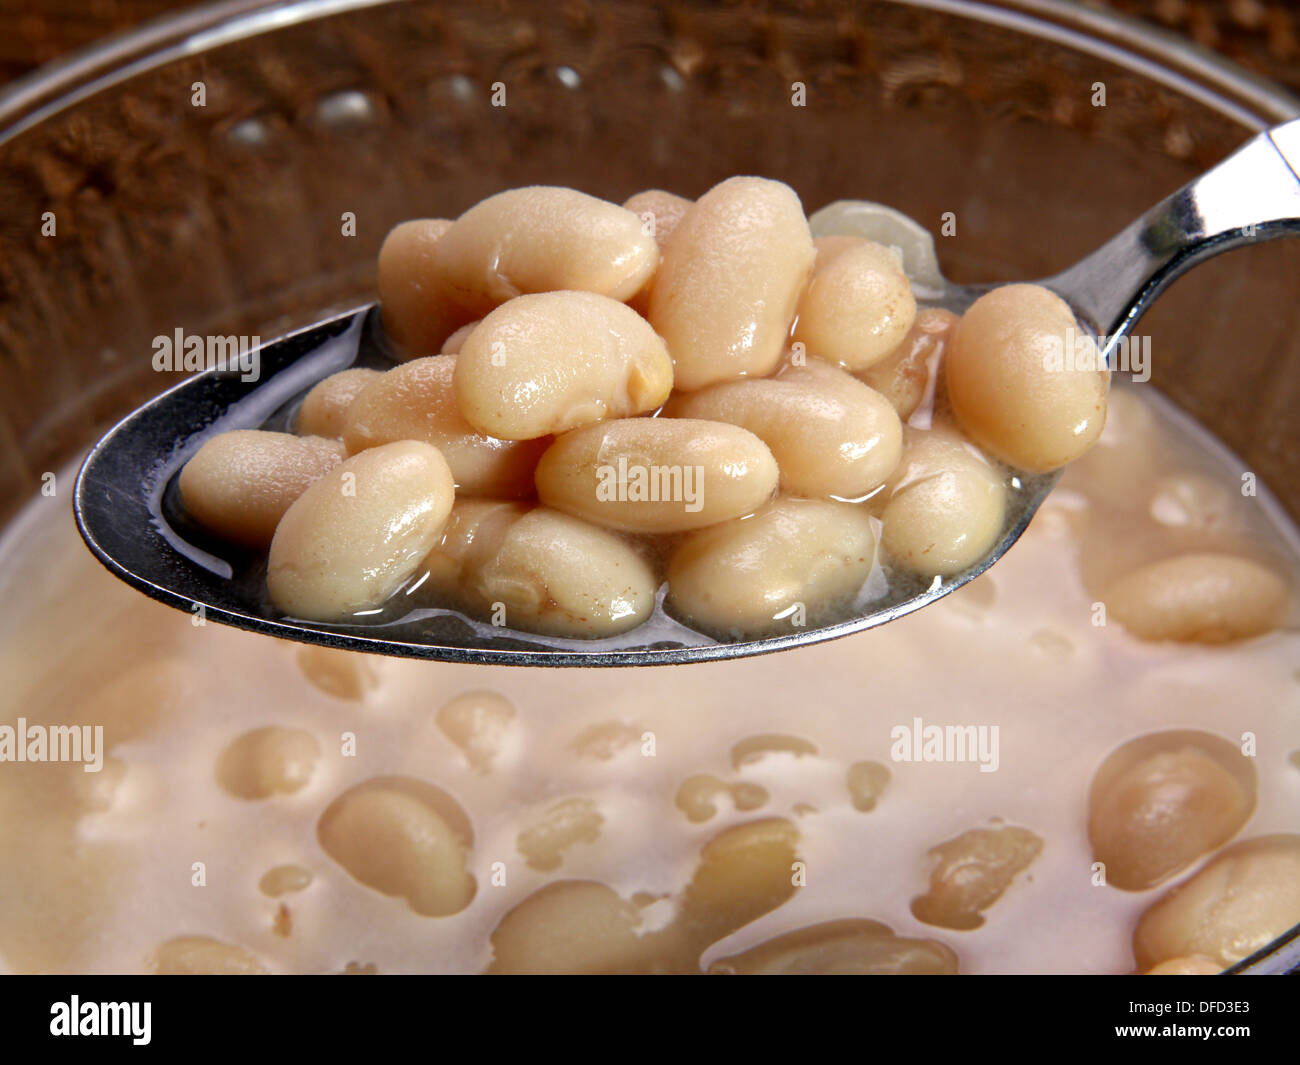 A image of a spoonful of Great Northern Beans Stock Photo